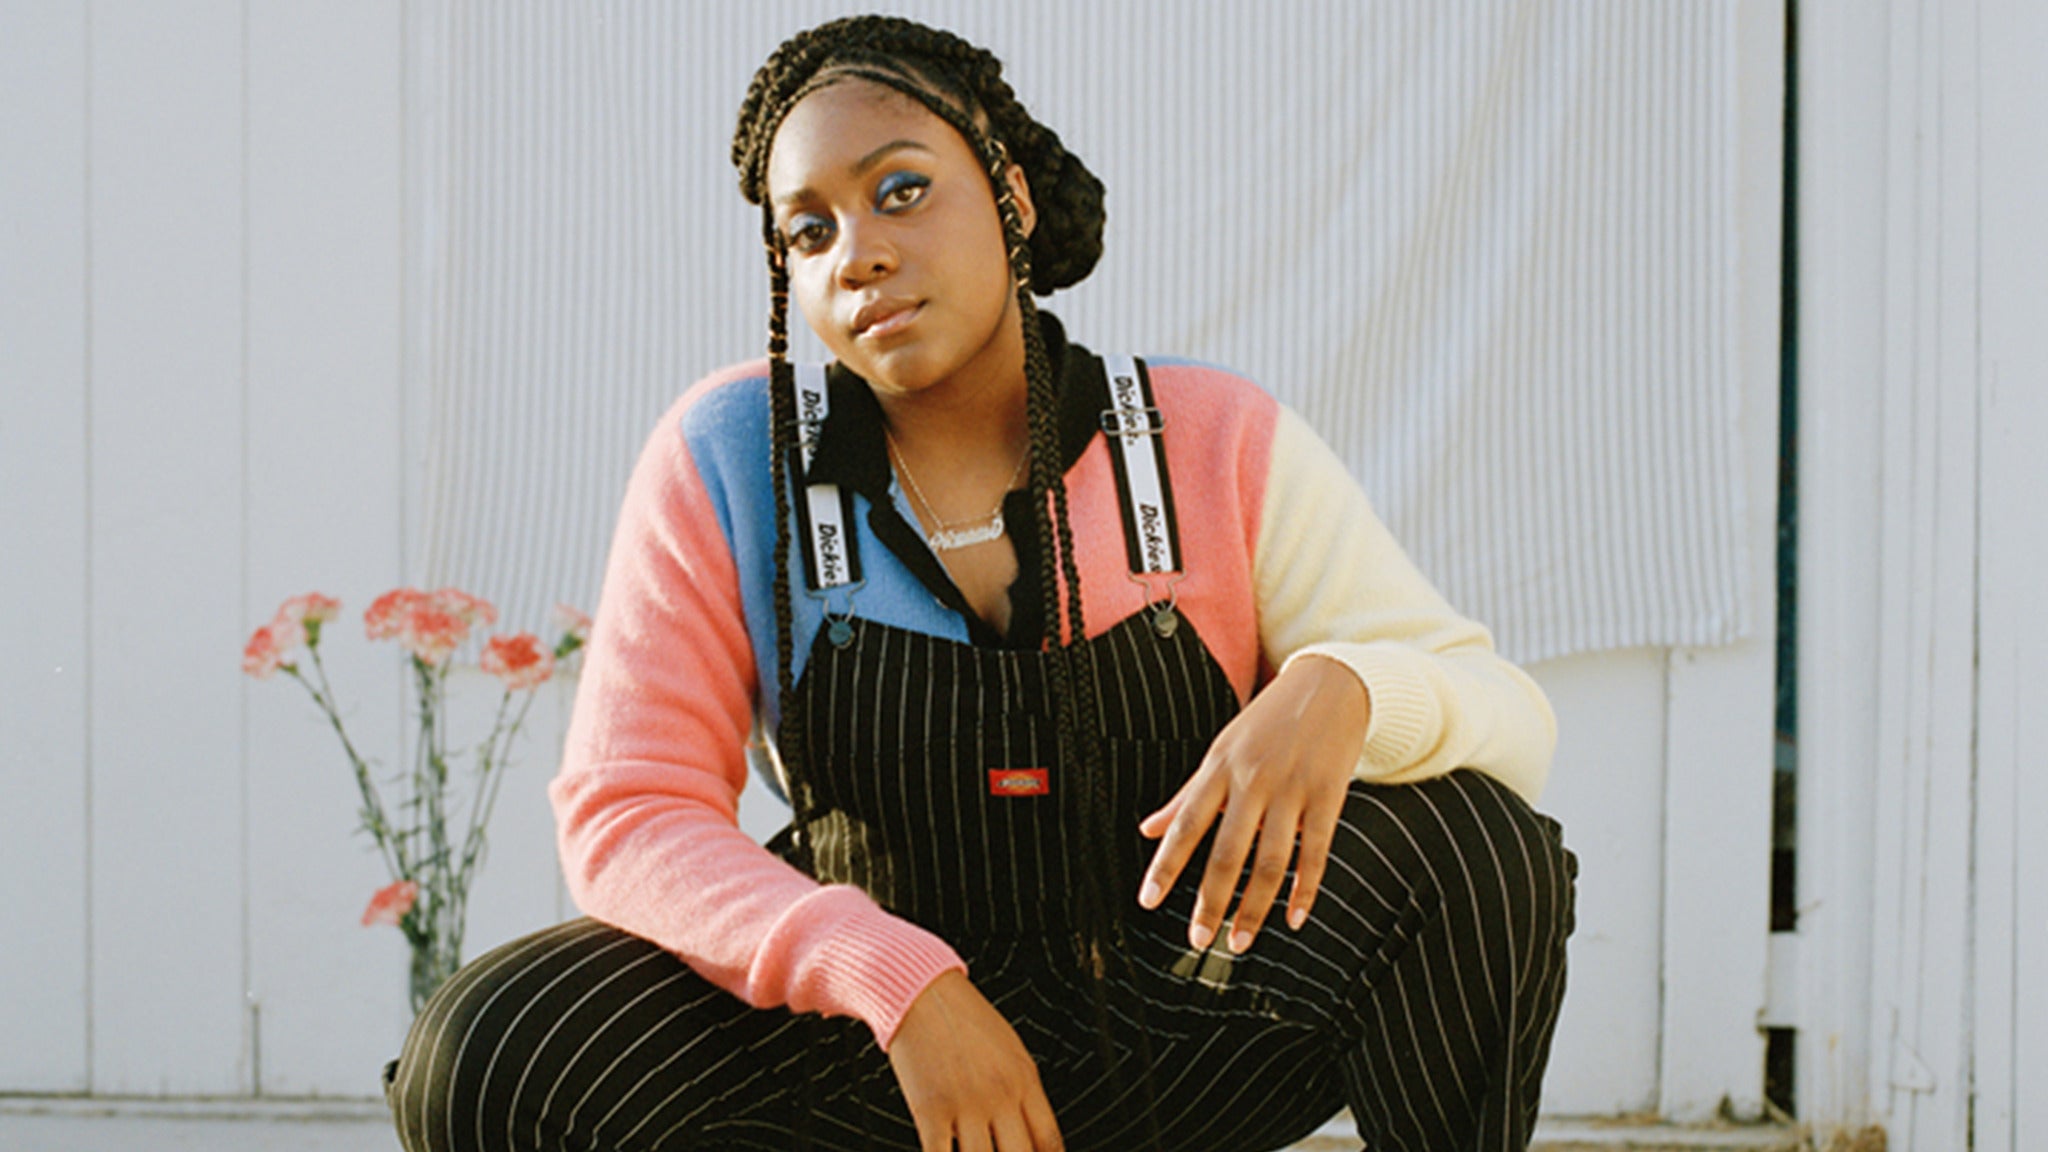 Noname in Los Angeles promo photo for Spotify presale offer code